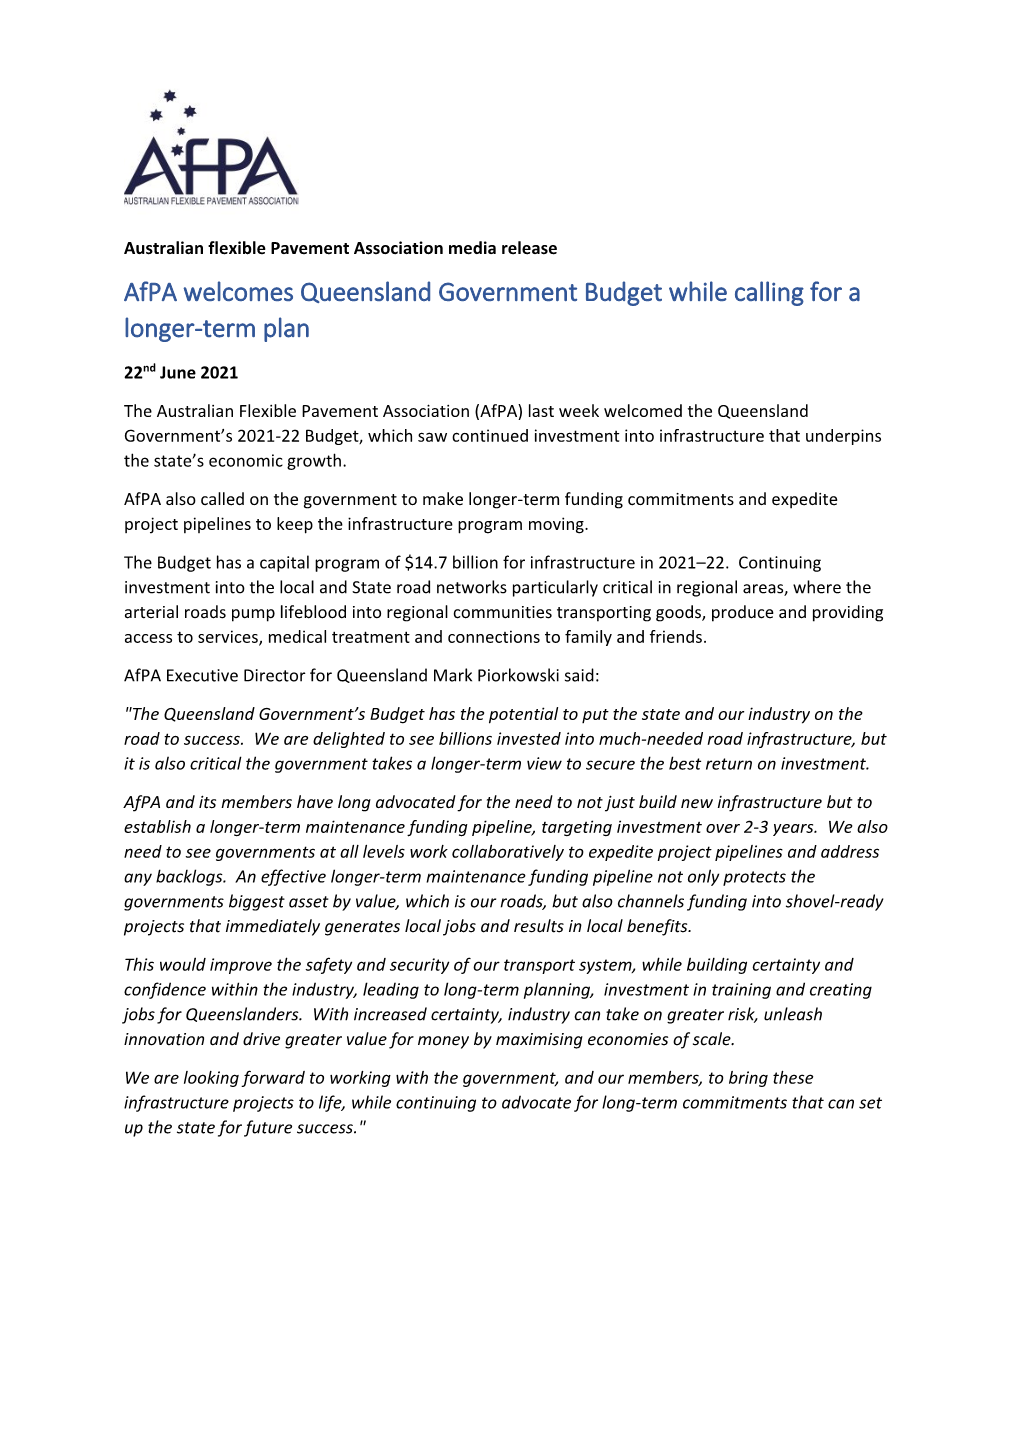 Afpa Welcomes Queensland Government Budget While Calling for a Longer-Term Plan